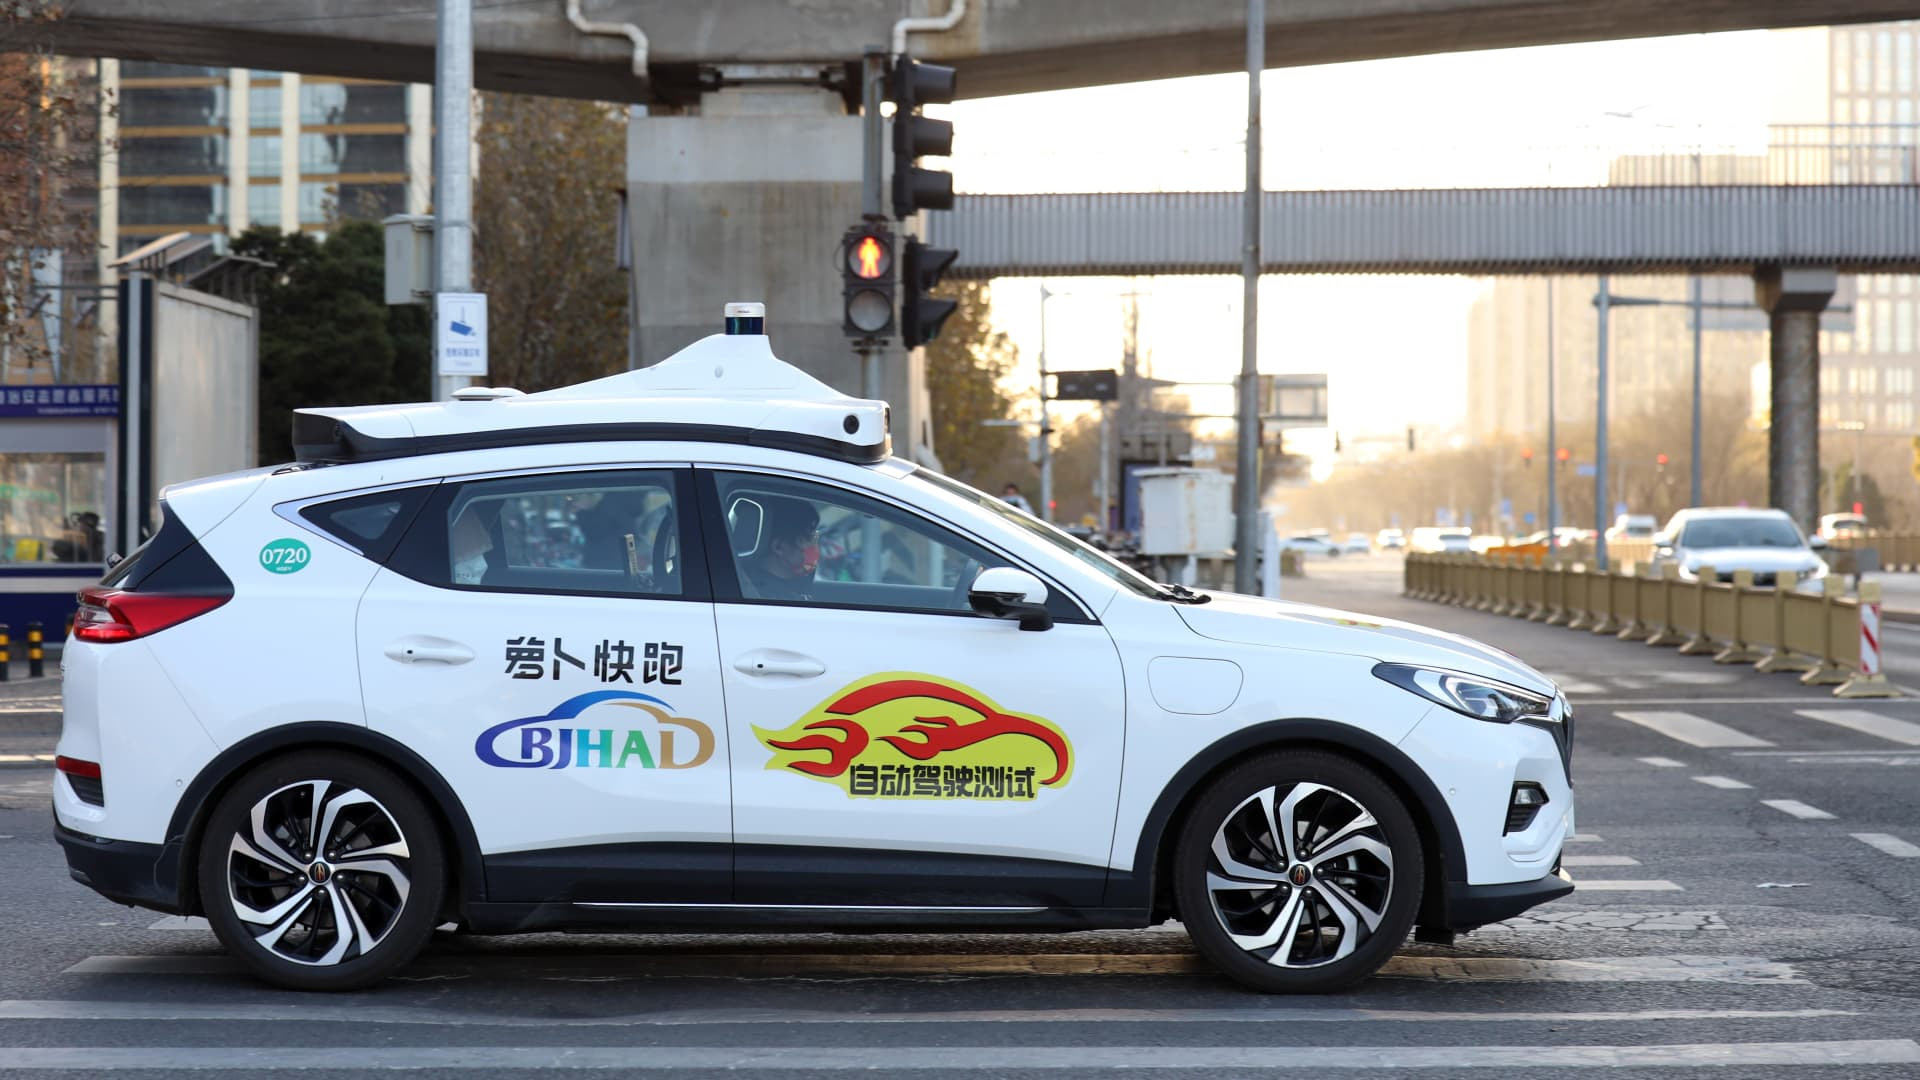 China's capital city loosens robotaxi restrictions for Baidu, Pony.ai in a big step toward removing human taxi drivers